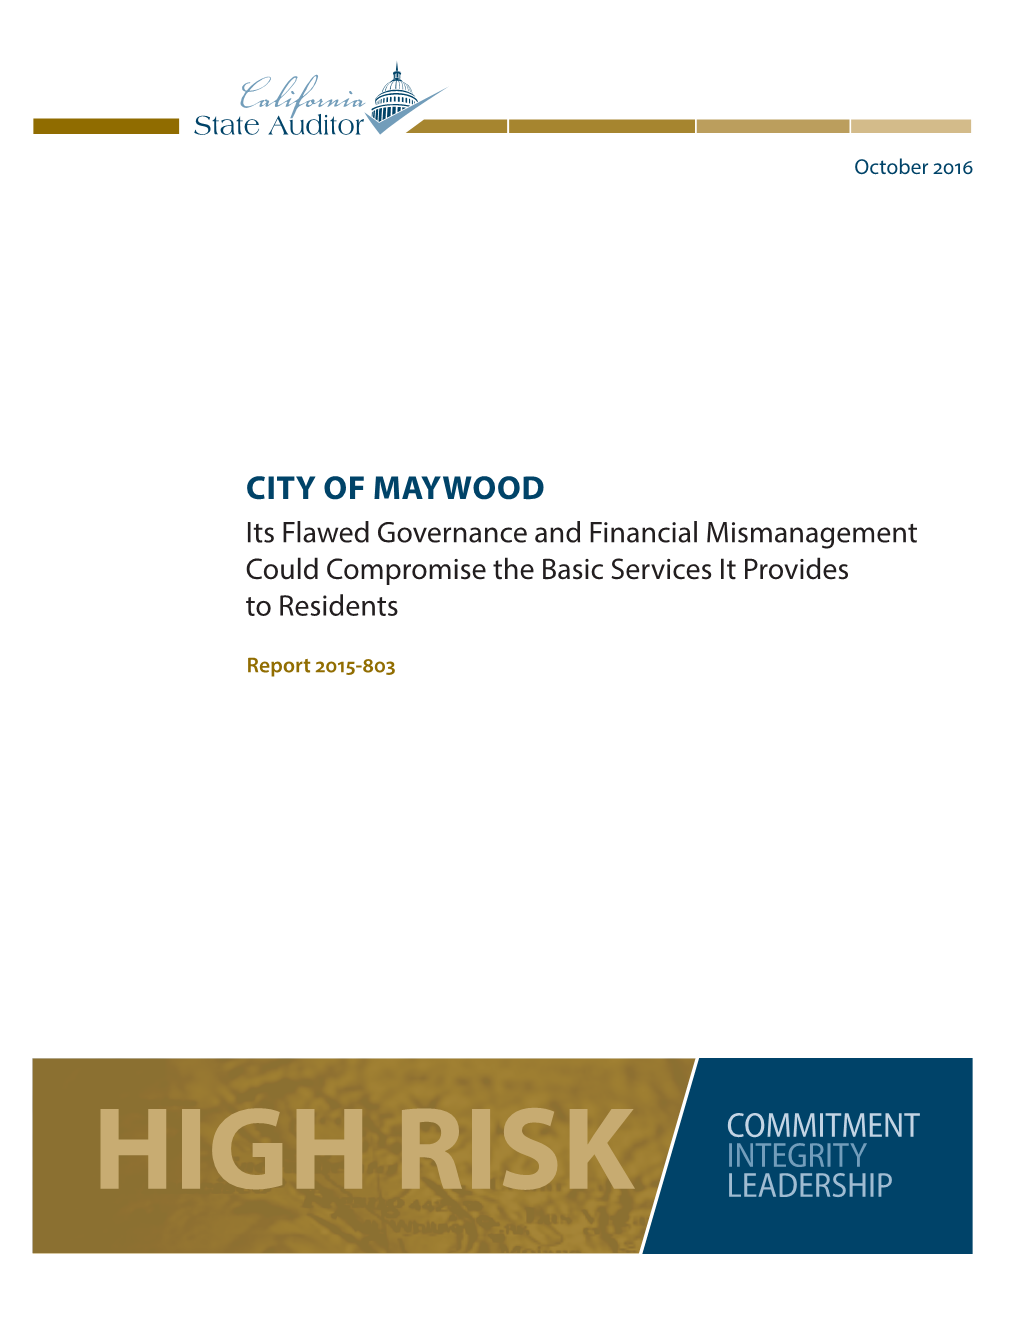 CITY of MAYWOOD Its Flawed Governance and Financial Mismanagement Could Compromise the Basic Services It Provides to Residents